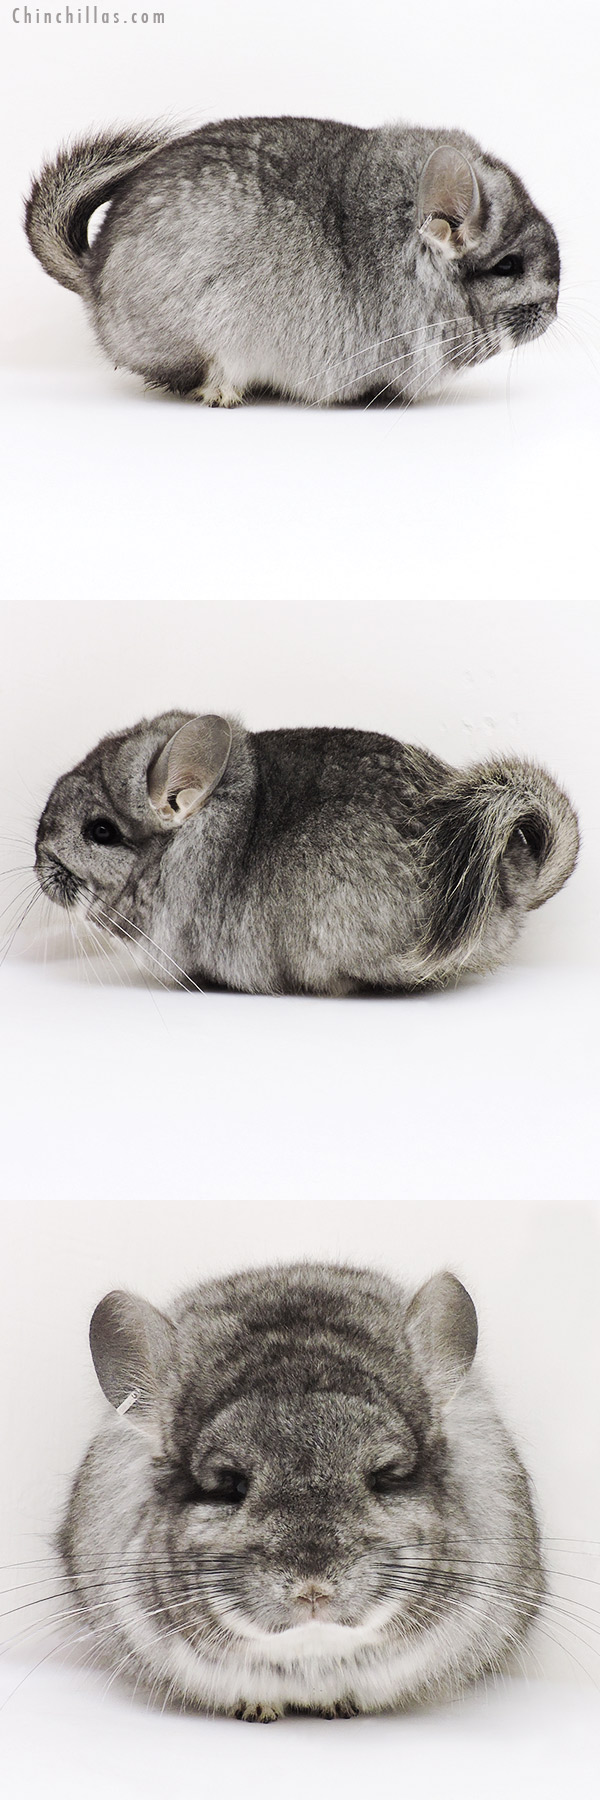 Chinchilla or related item offered for sale or export on Chinchillas.com - 16305 Exceptional Standard  Royal Persian Angora Male Chinchilla with Lion Mane